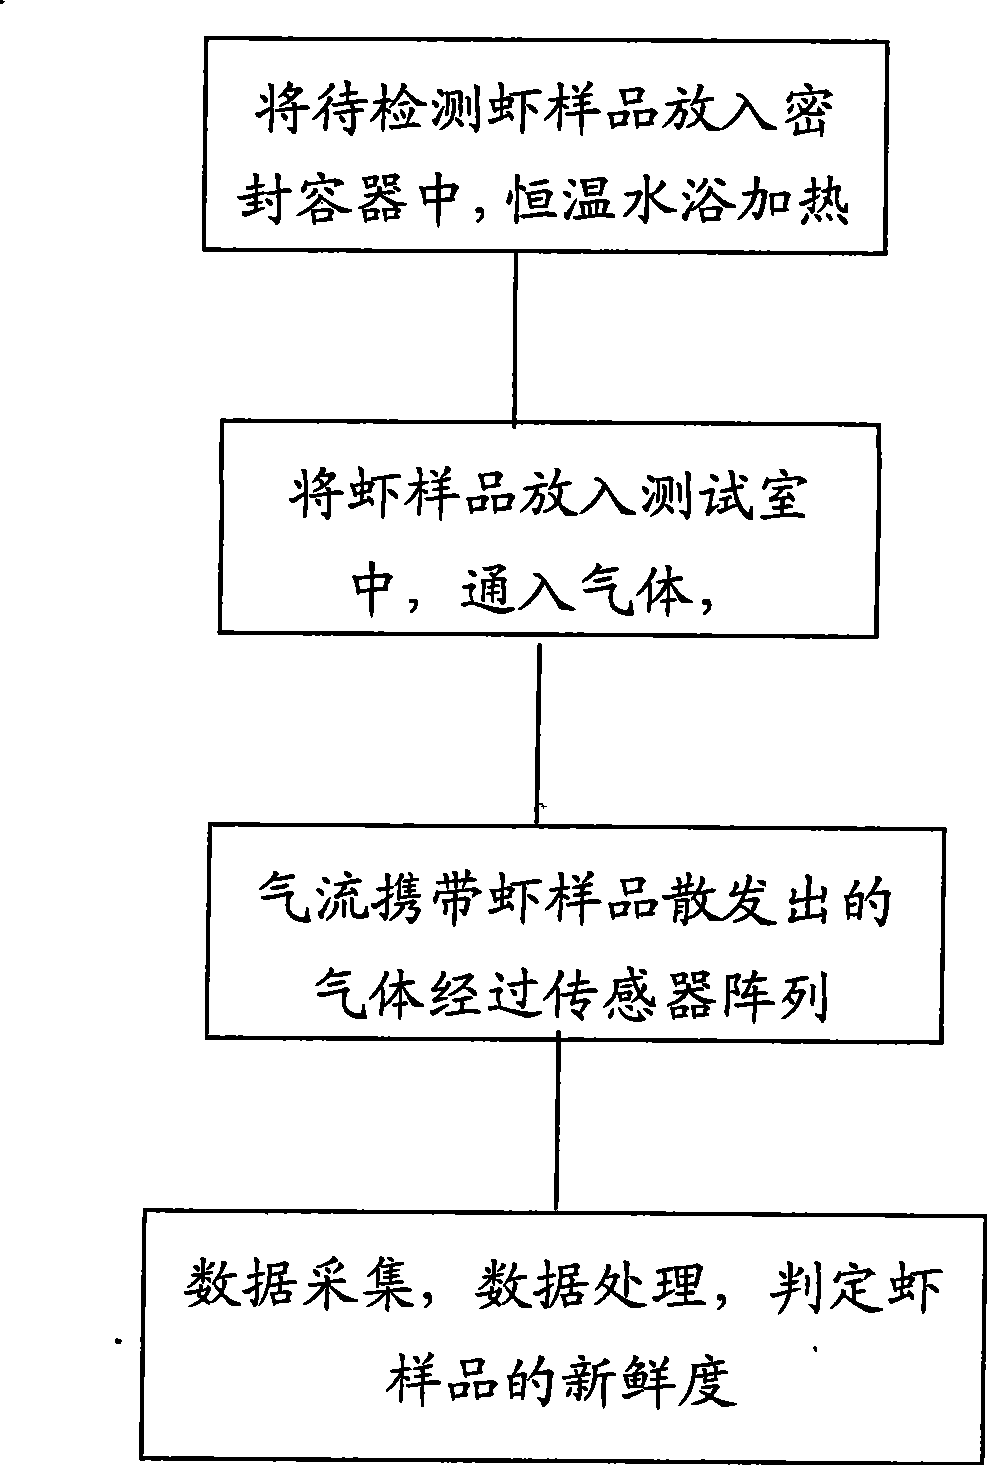 Method for detecting fresh degree of shrimp by electronic nose